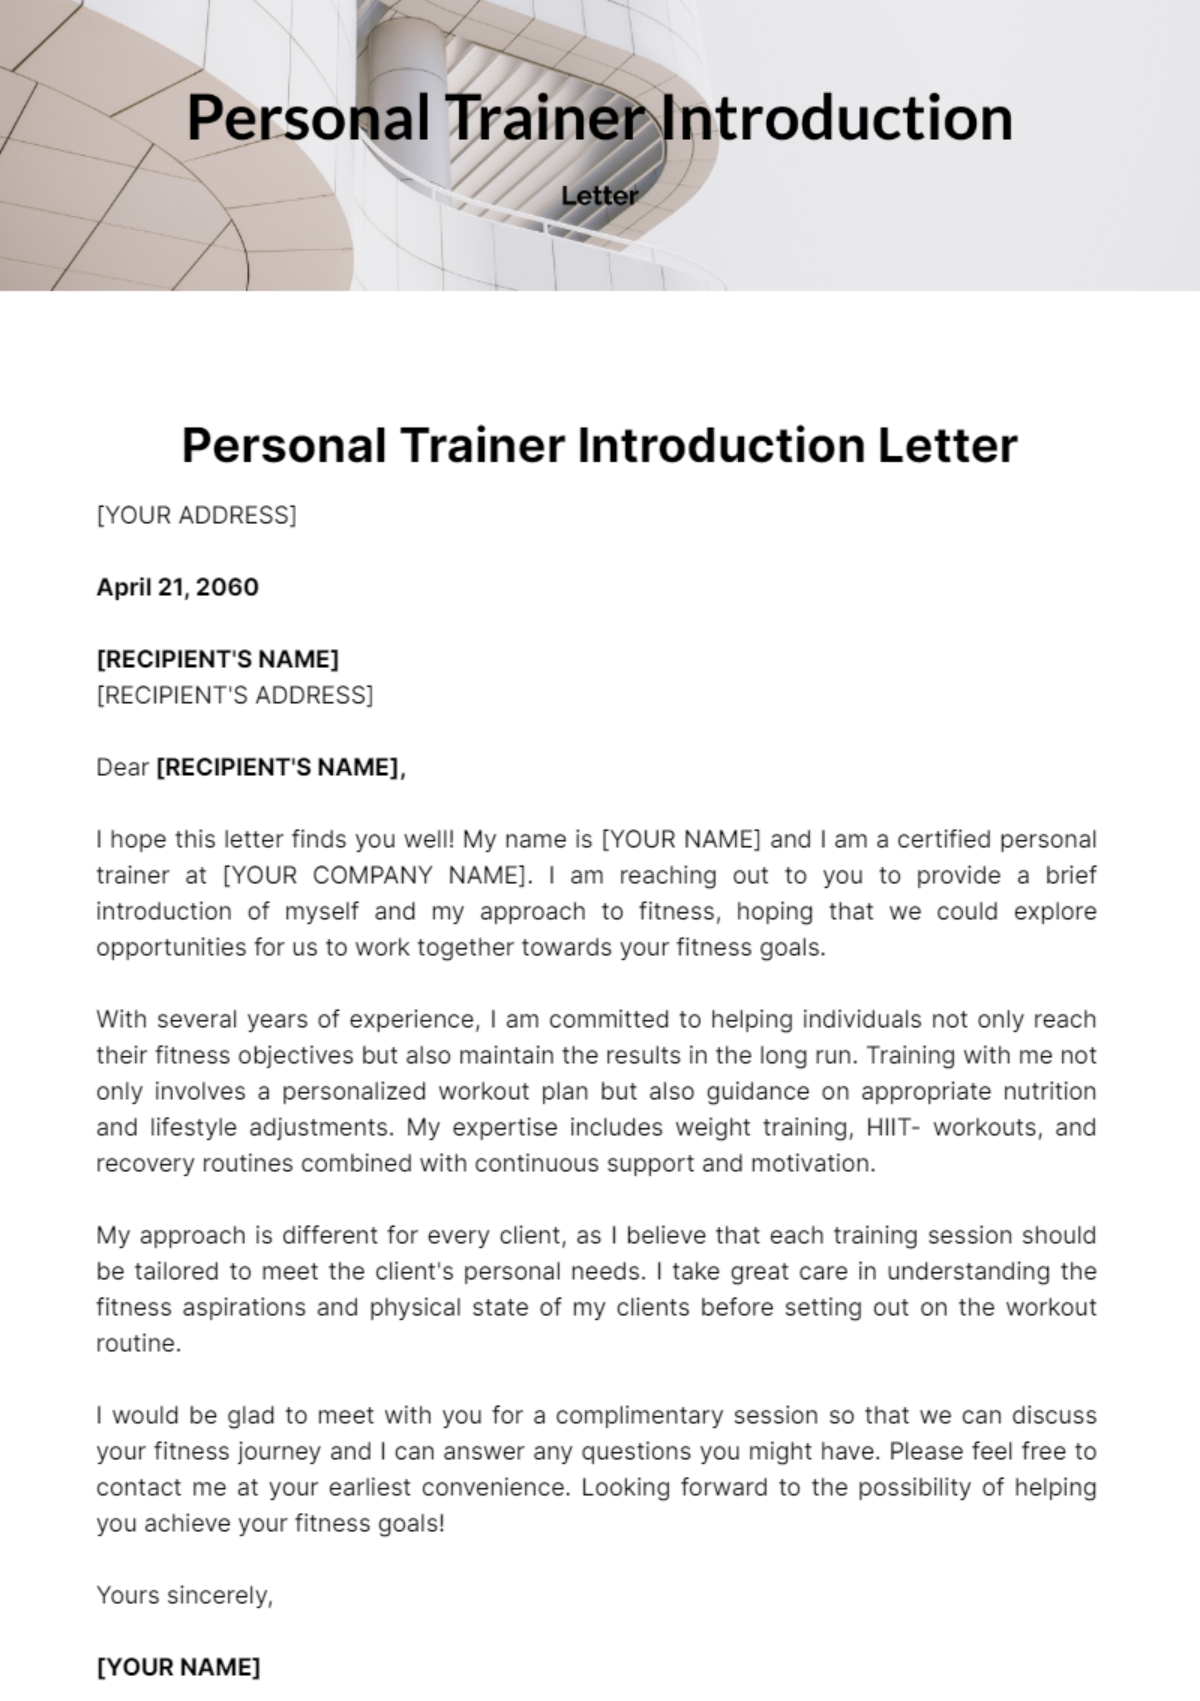 Free Personal Trainer Introduction Letter Template